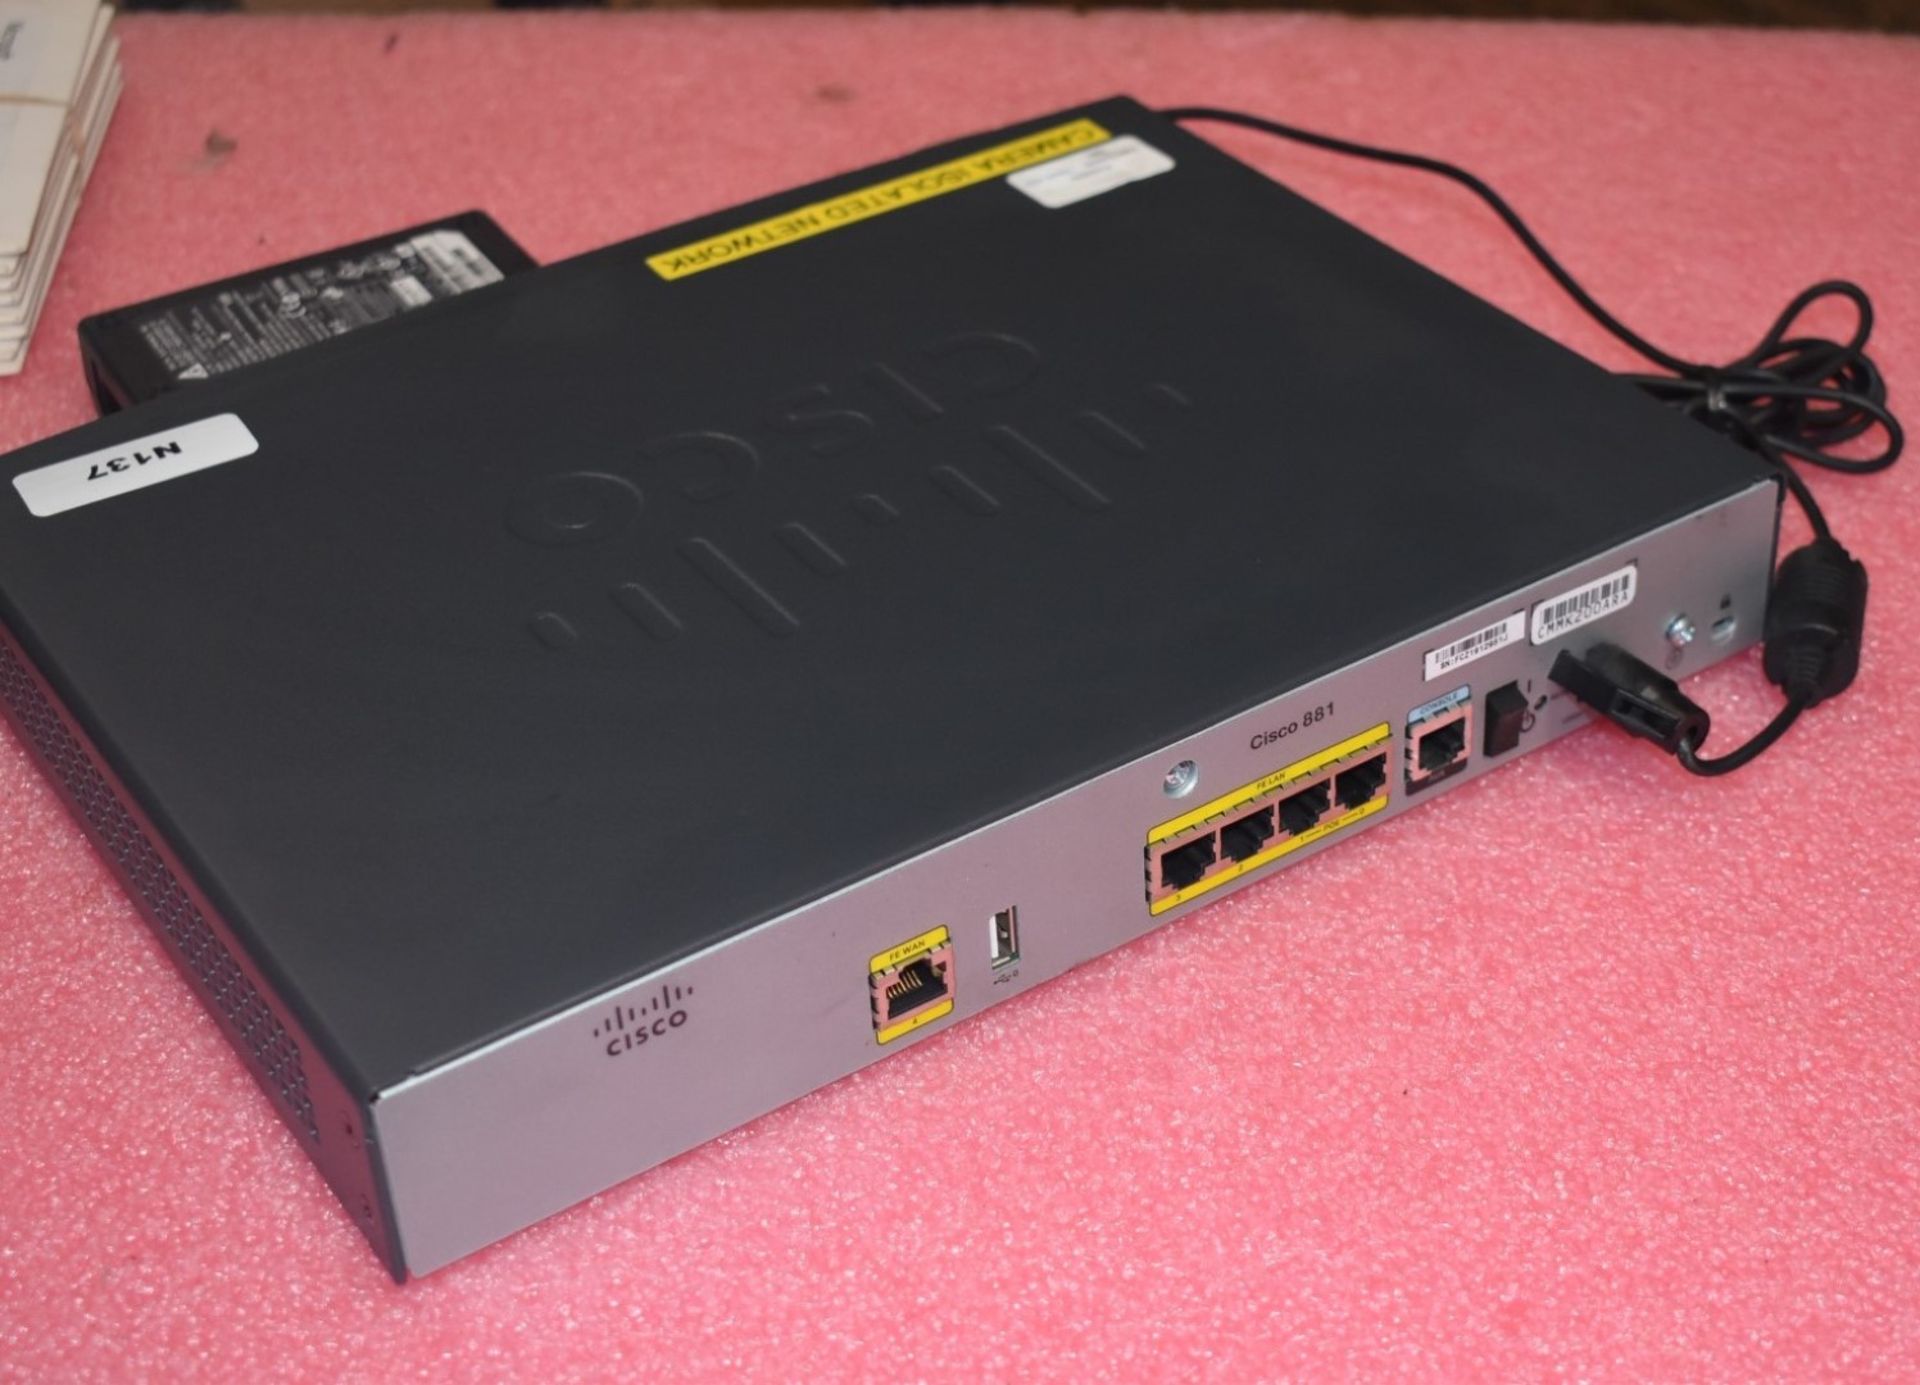 1 x Cisco C881-K9 880 Series Integrated Services Router - Includes Power Adaptor - Image 3 of 4